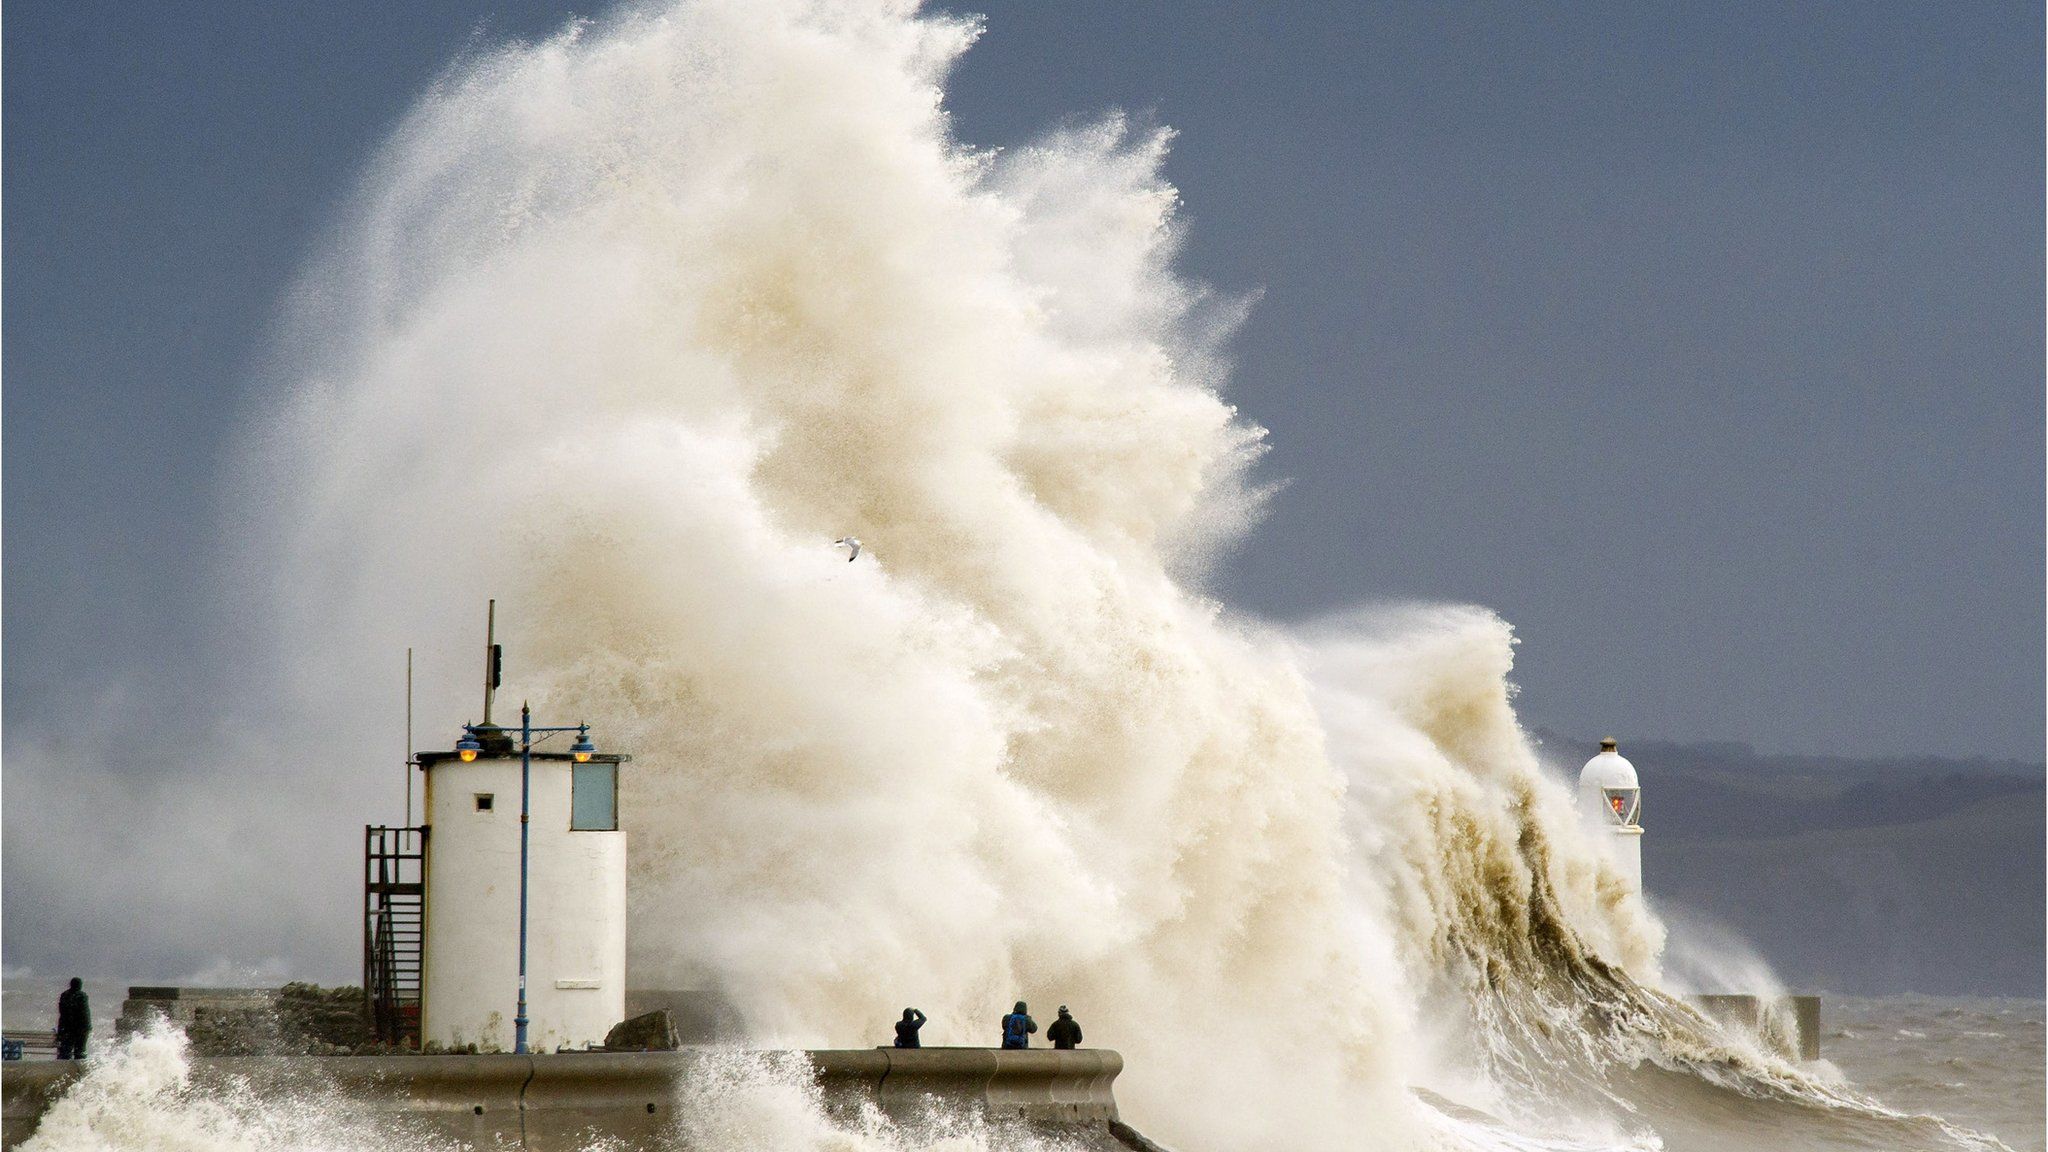 Spectators watch as waves break over the harbour wall at Porthcawl